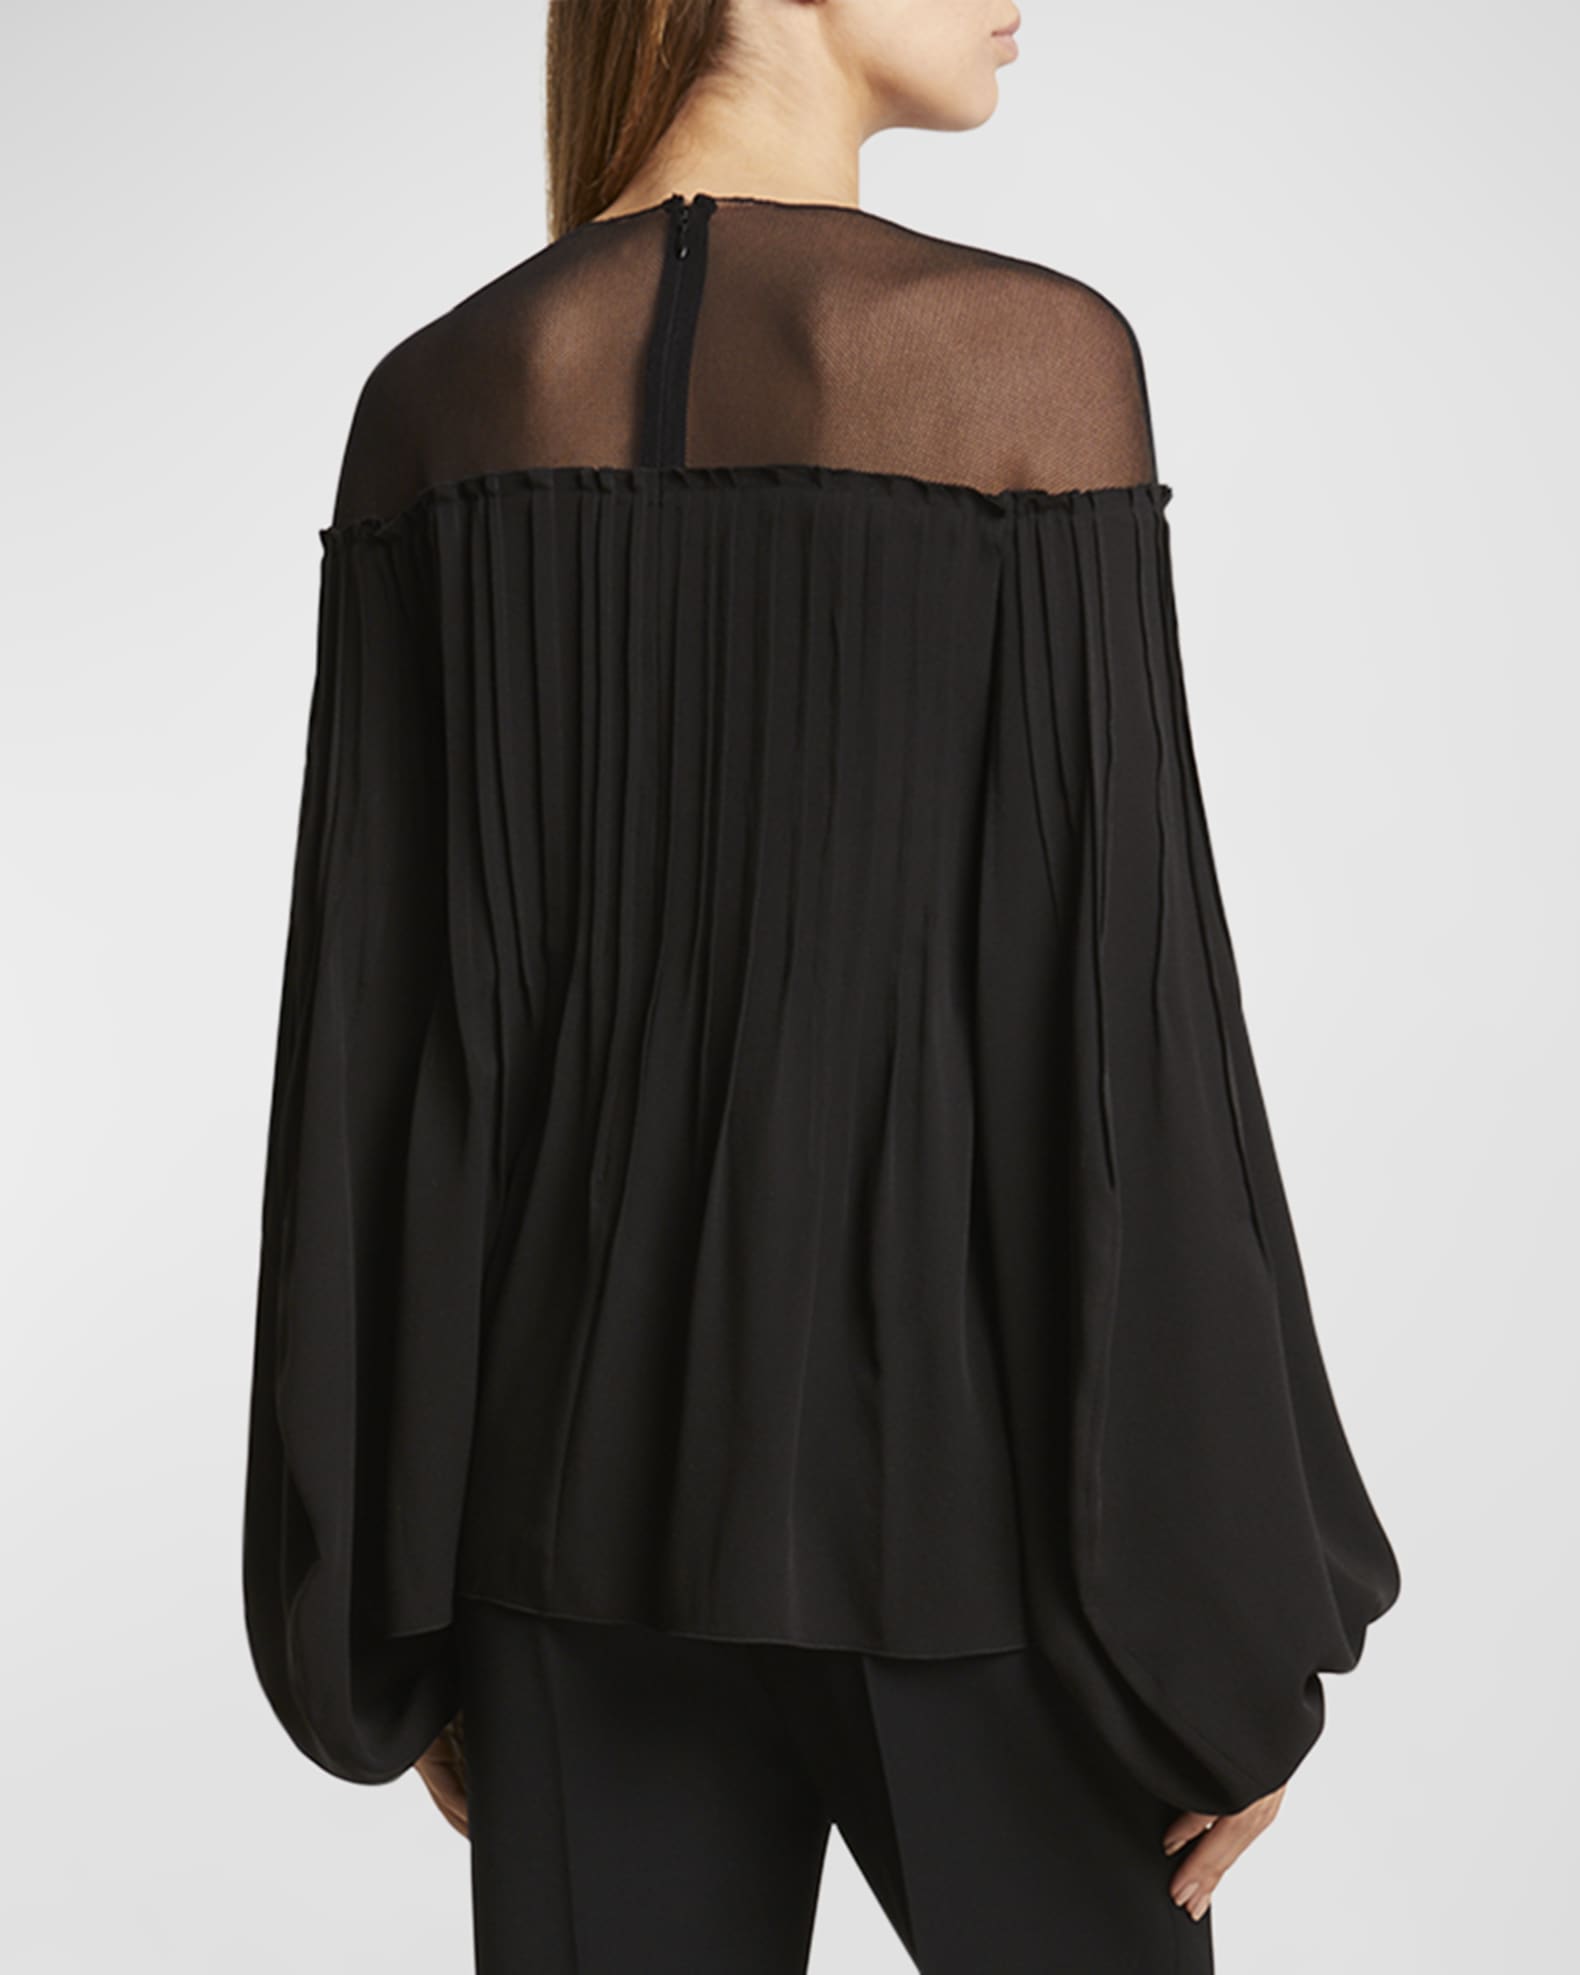 Chloe Illusion Silk Top with Lace Detail | Neiman Marcus